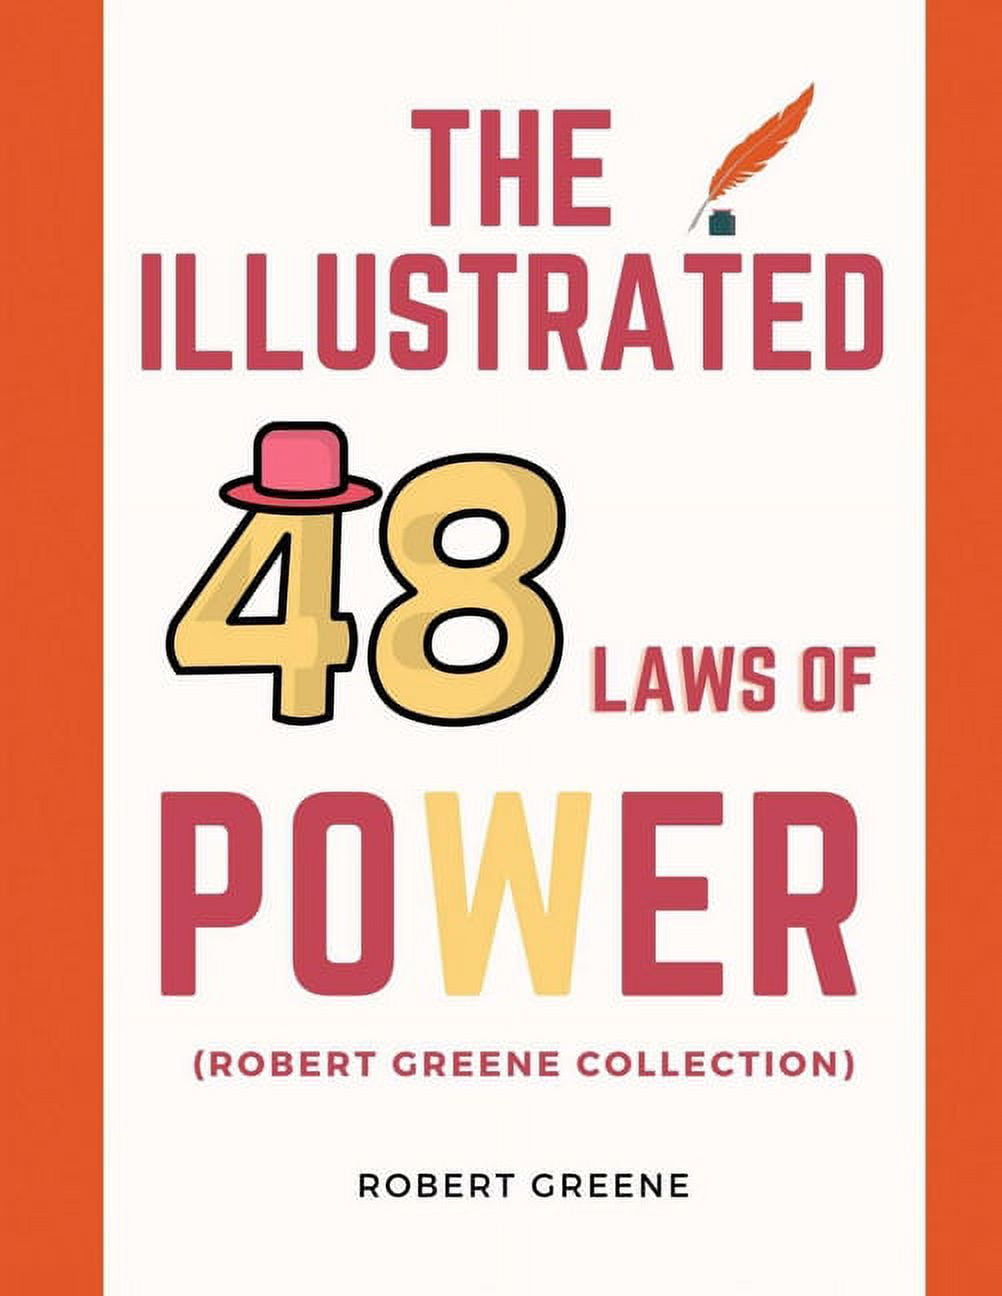 The Concise 48 Laws of Power By Robert Greene Political Leadership  Political Philosophy Motivation Paperback